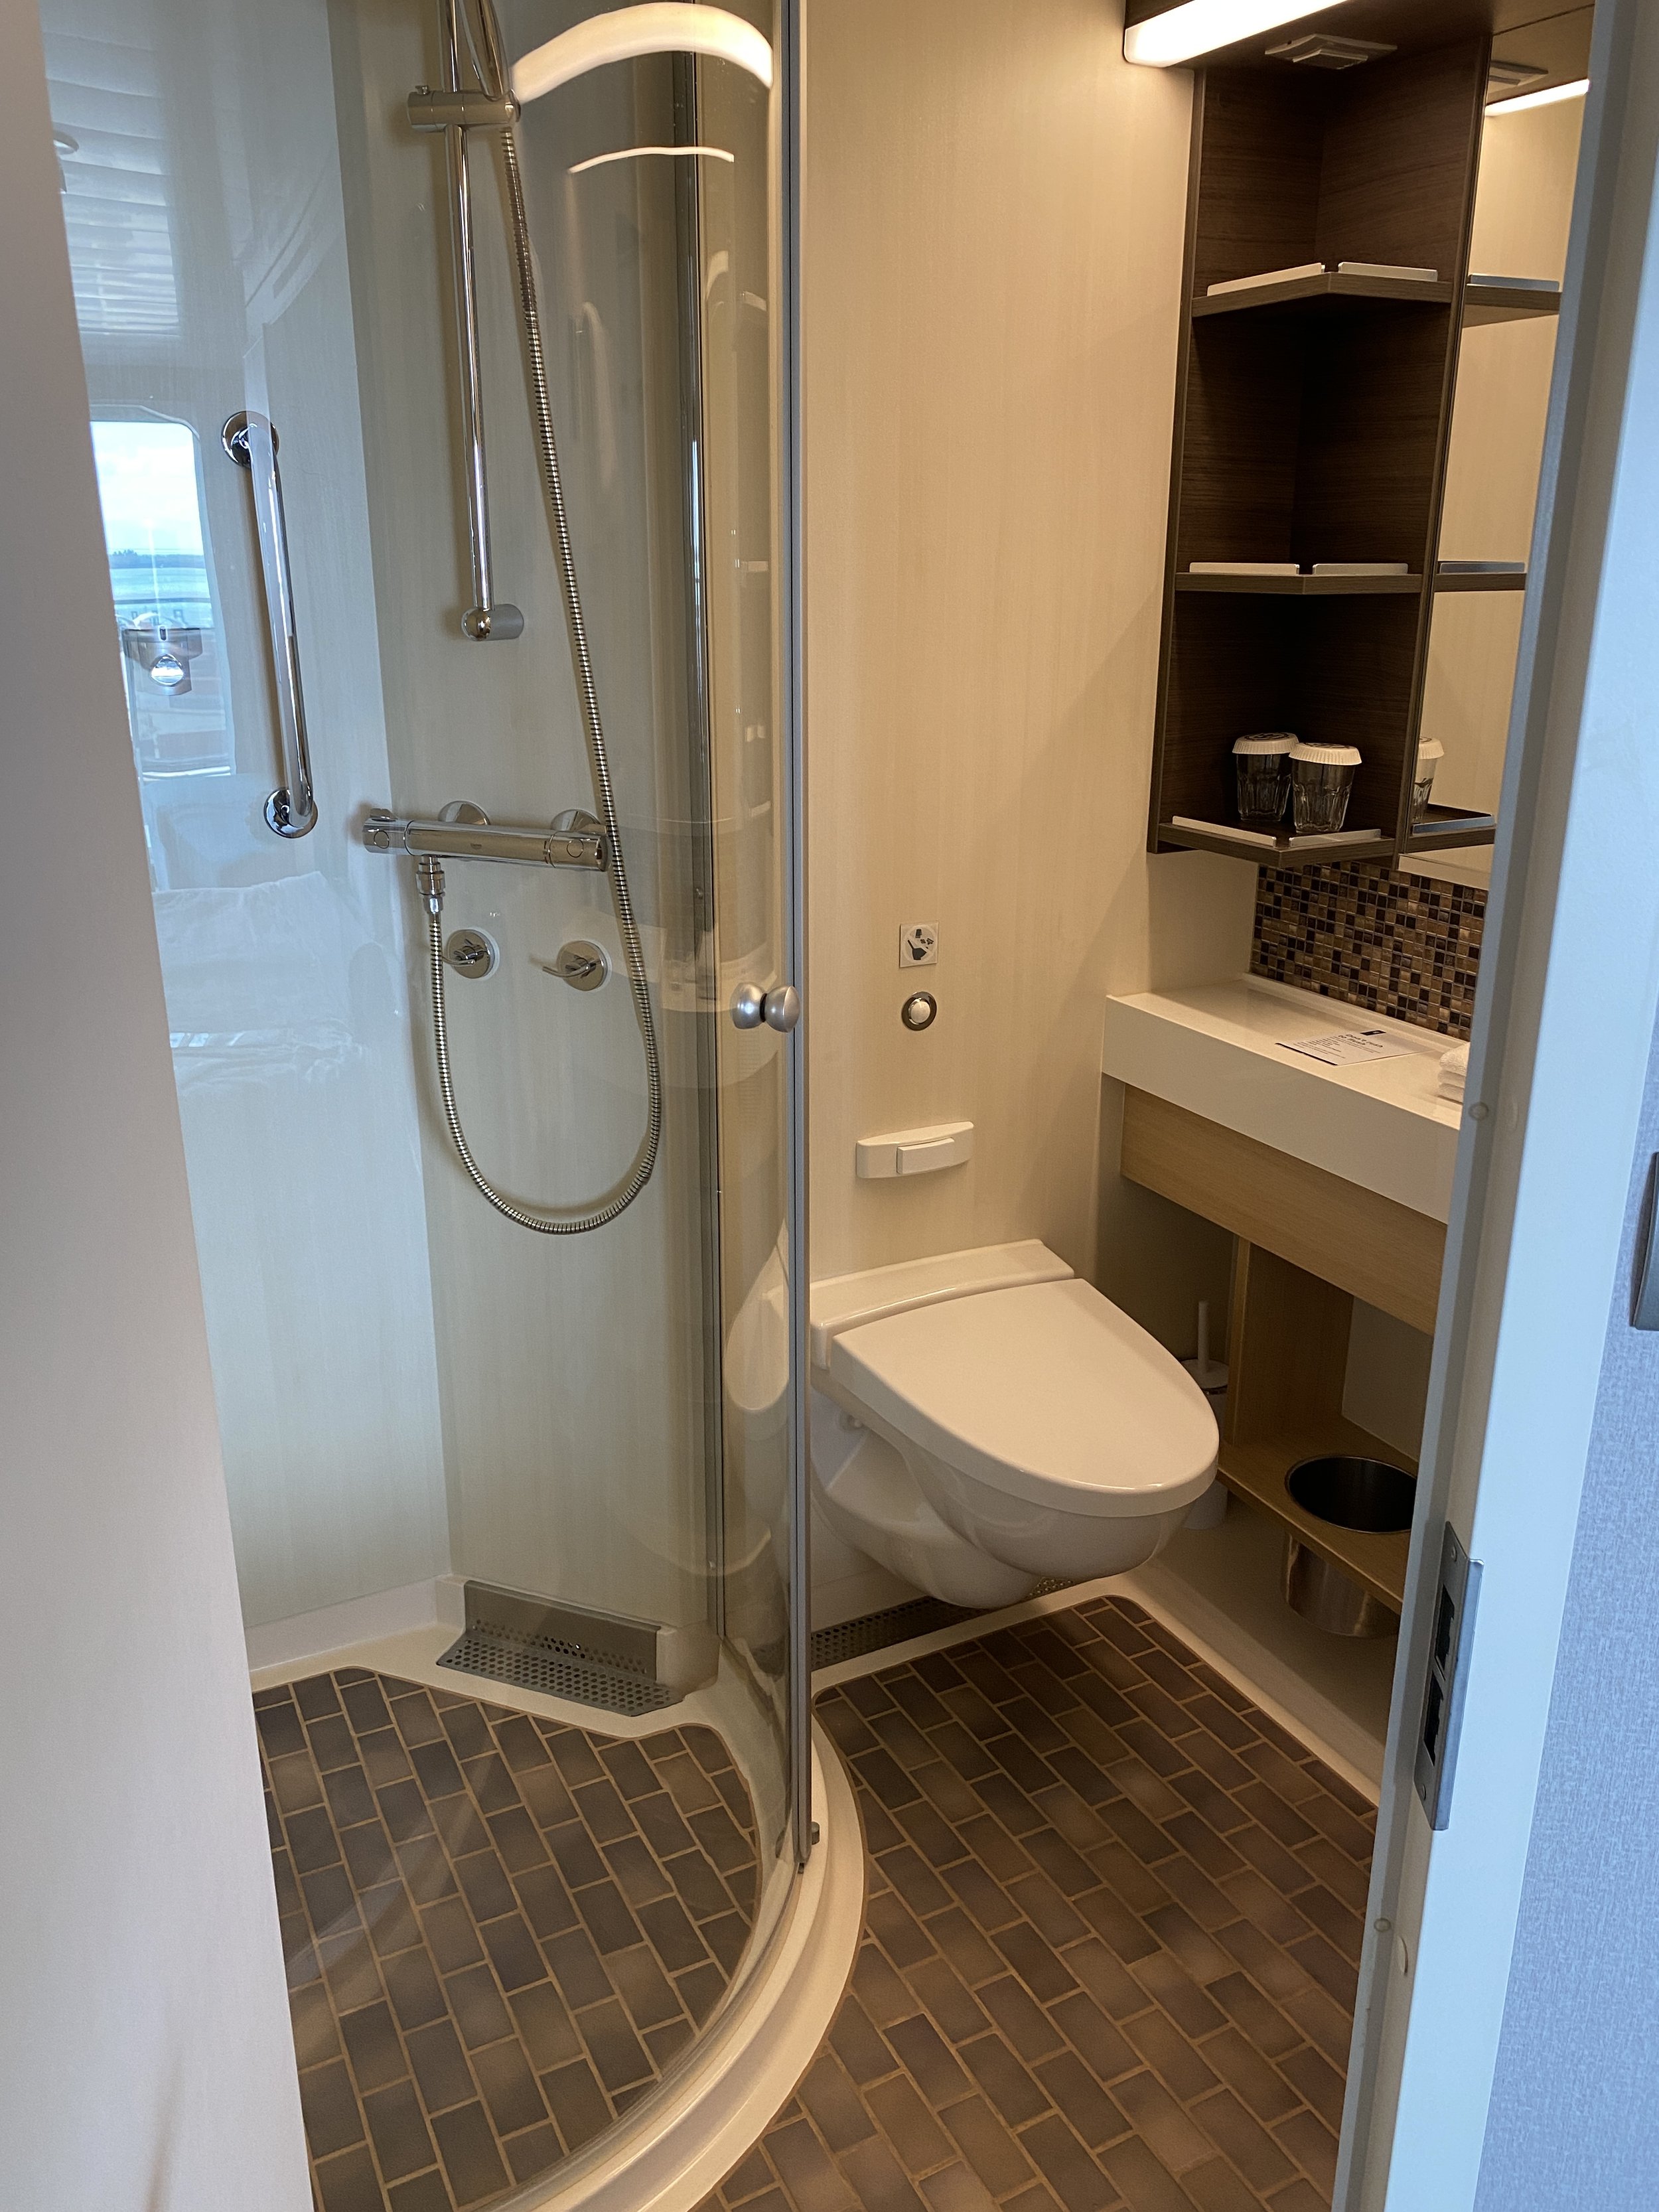  Bathrooms are generally tiny on cruise ships, this was no different. There’s no tub, but the standup shower is more spacious than it looks.  